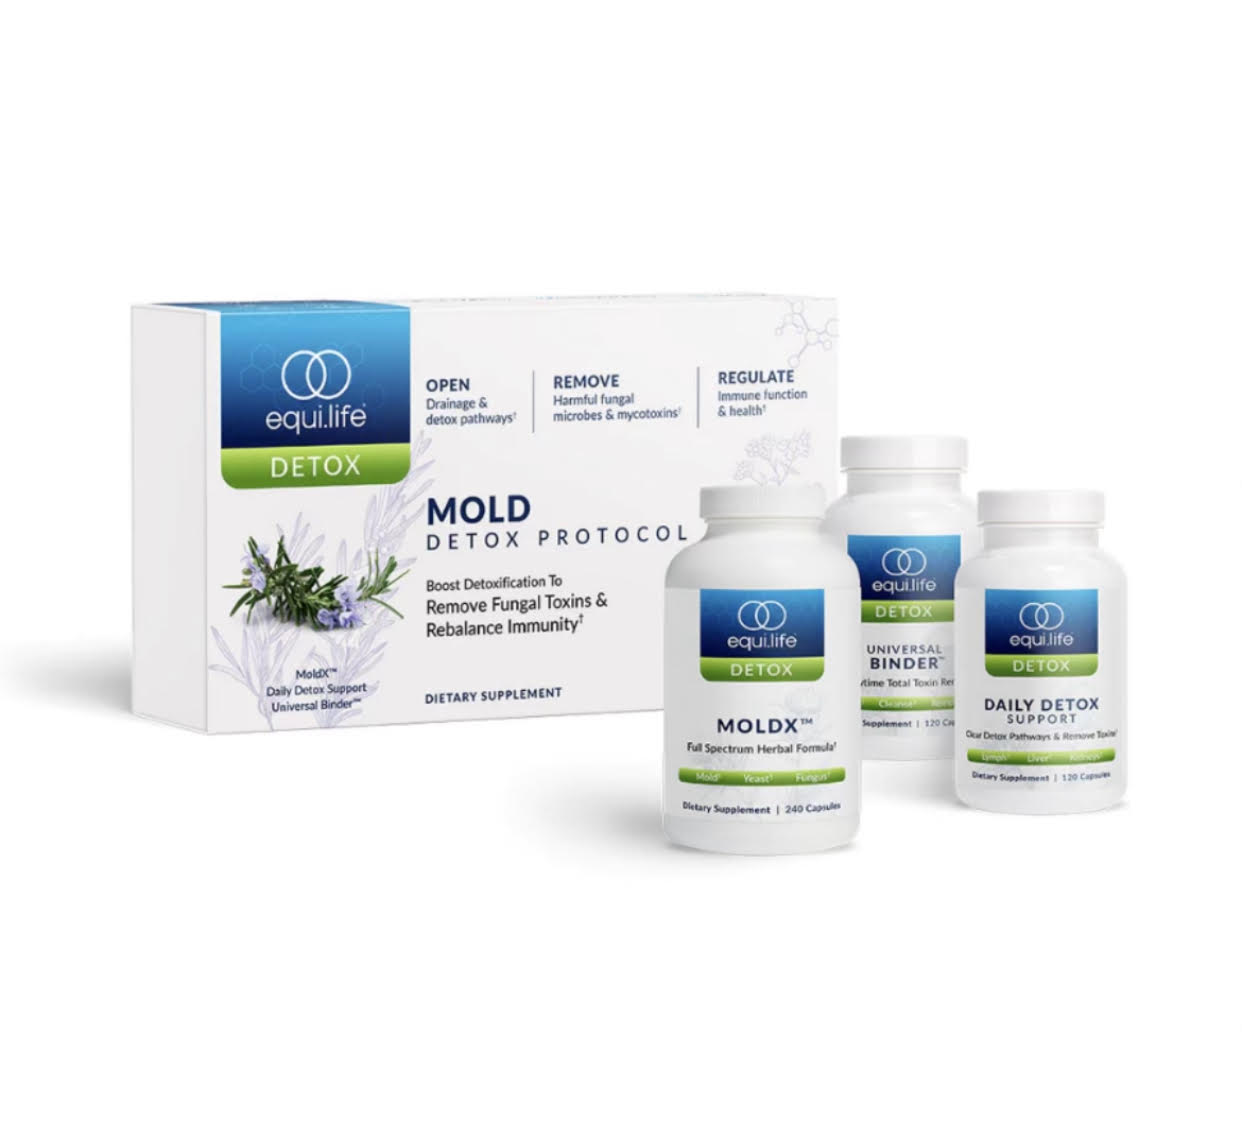 EquiLife Mold Protocol